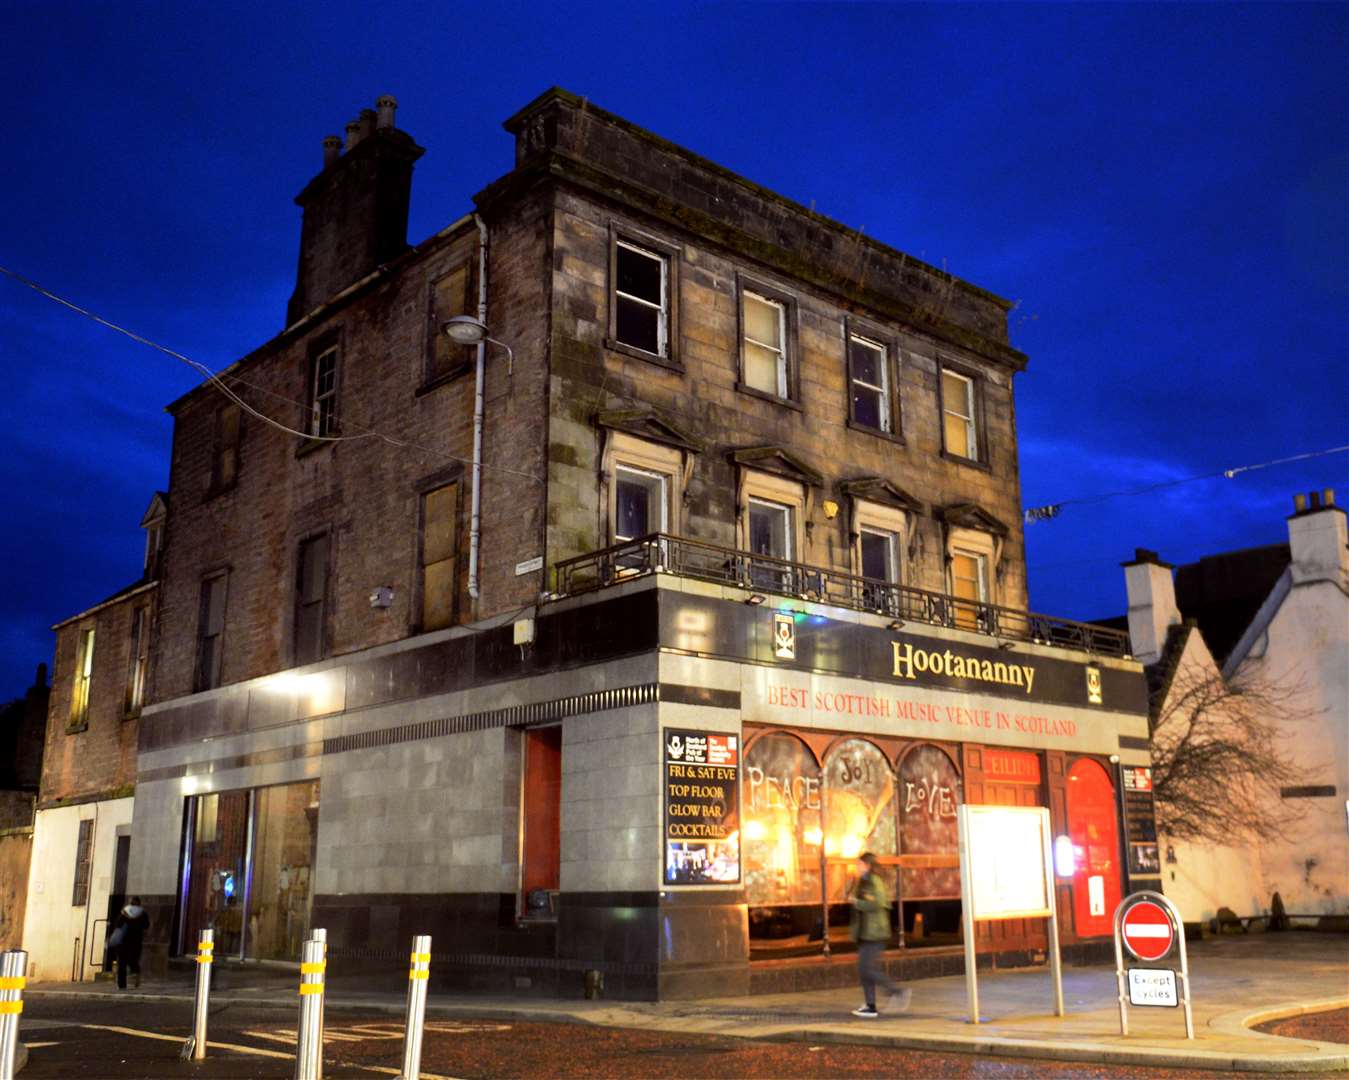 Hootananny in Inverness is among the music venues to receive emergency funding from the Scottish Government.